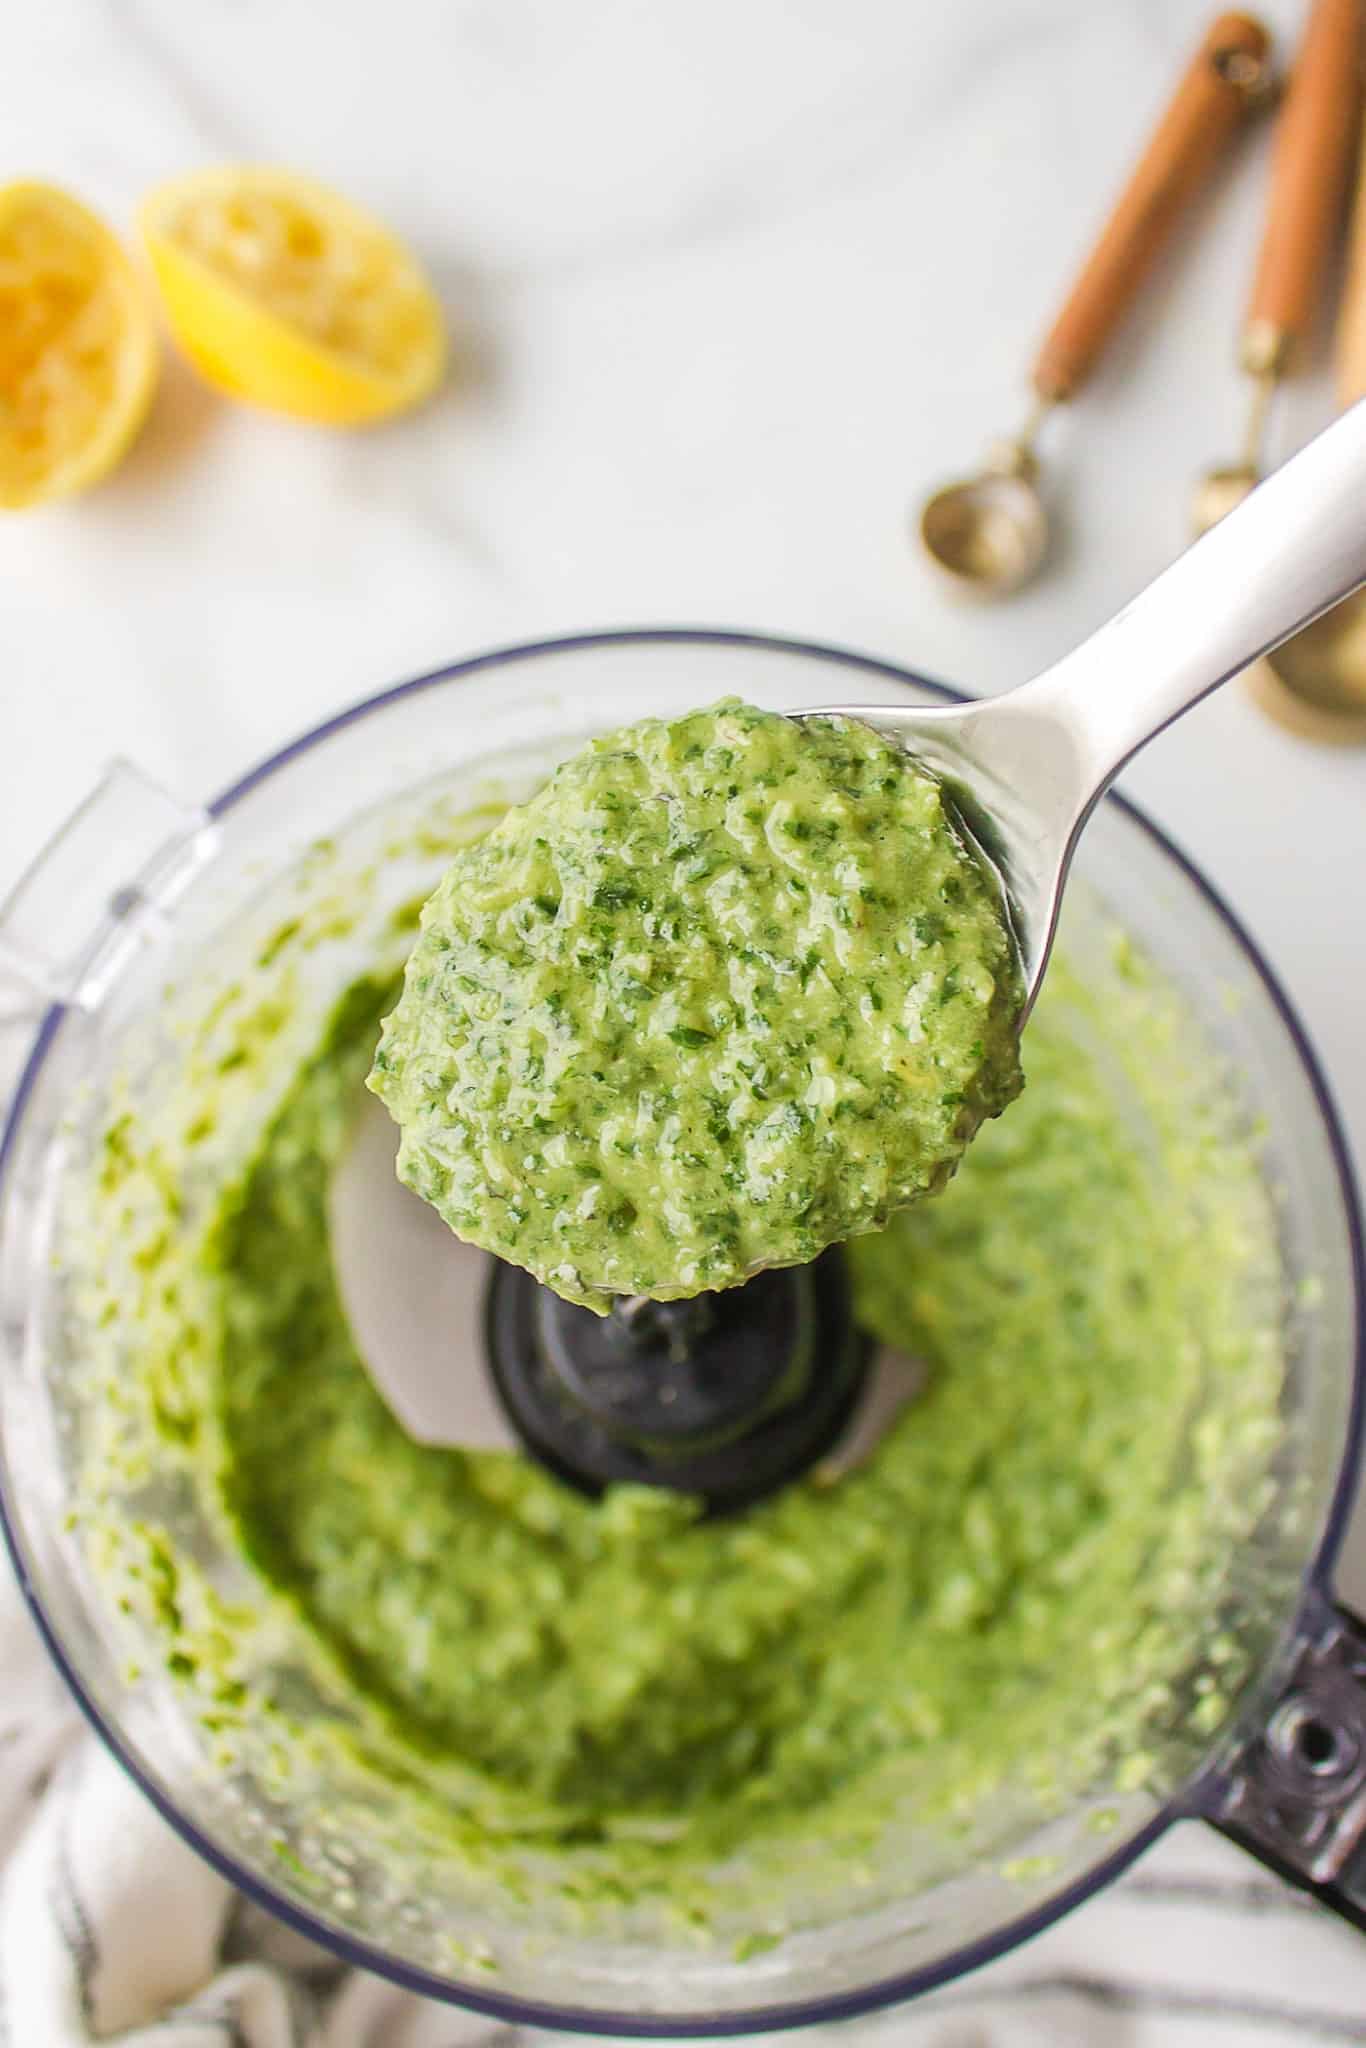 dairy-free pesto sauce made in a food processor and shown on a spoon.